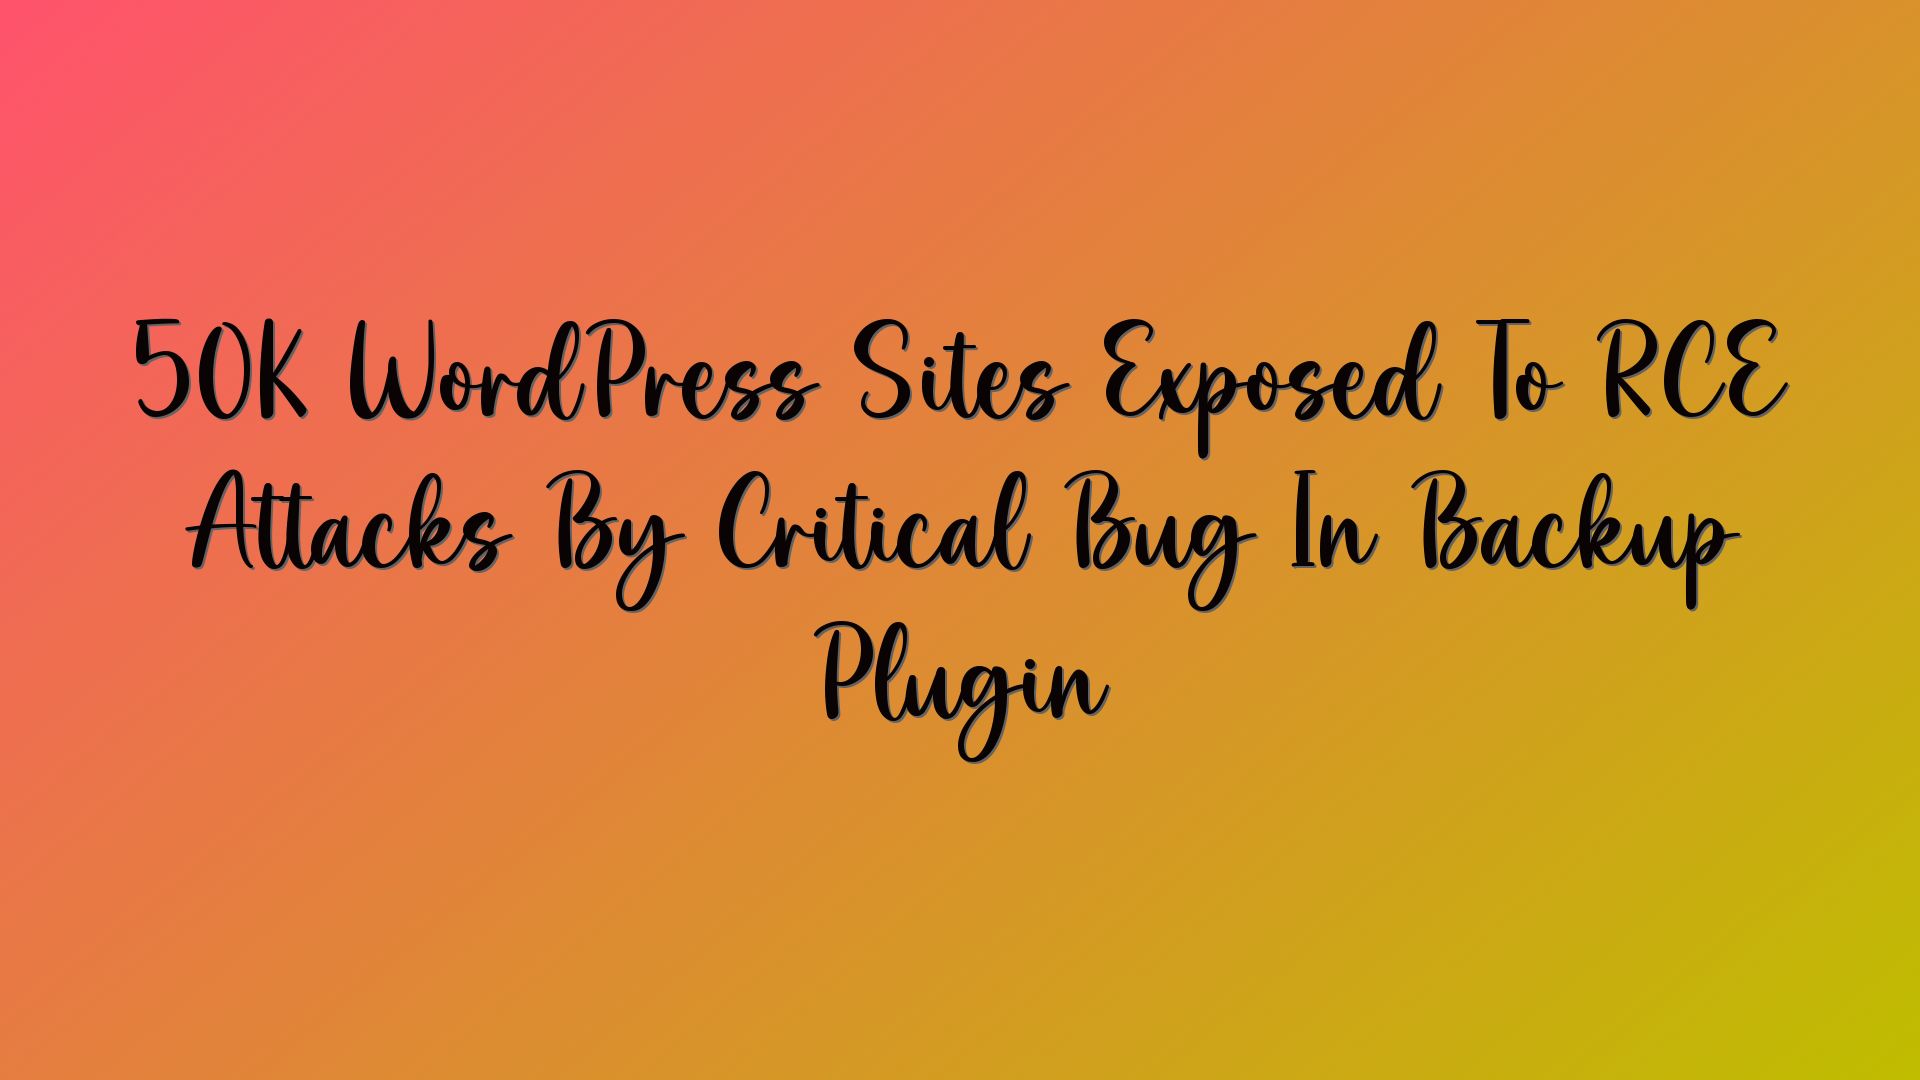 50K WordPress Sites Exposed To RCE Attacks By Critical Bug In Backup Plugin